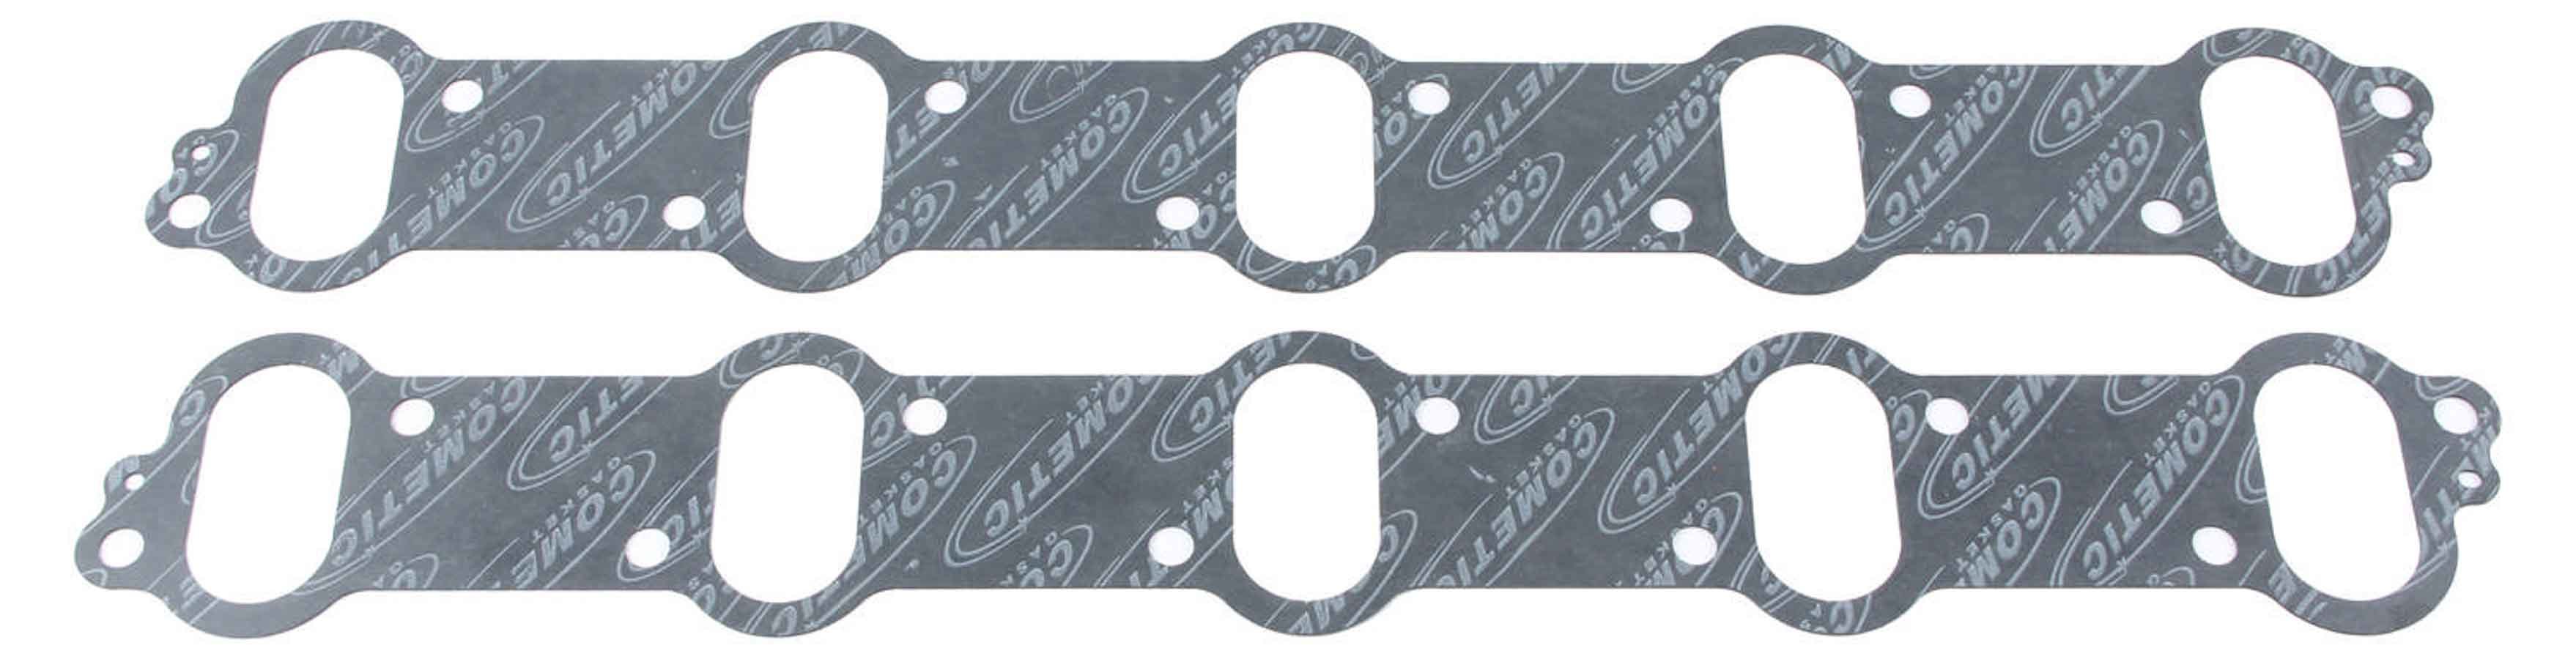 Cometic Gasket C5323-040 MLS .040 Thickness 4.165 Head Gasket for Small Block Chevy SB2 